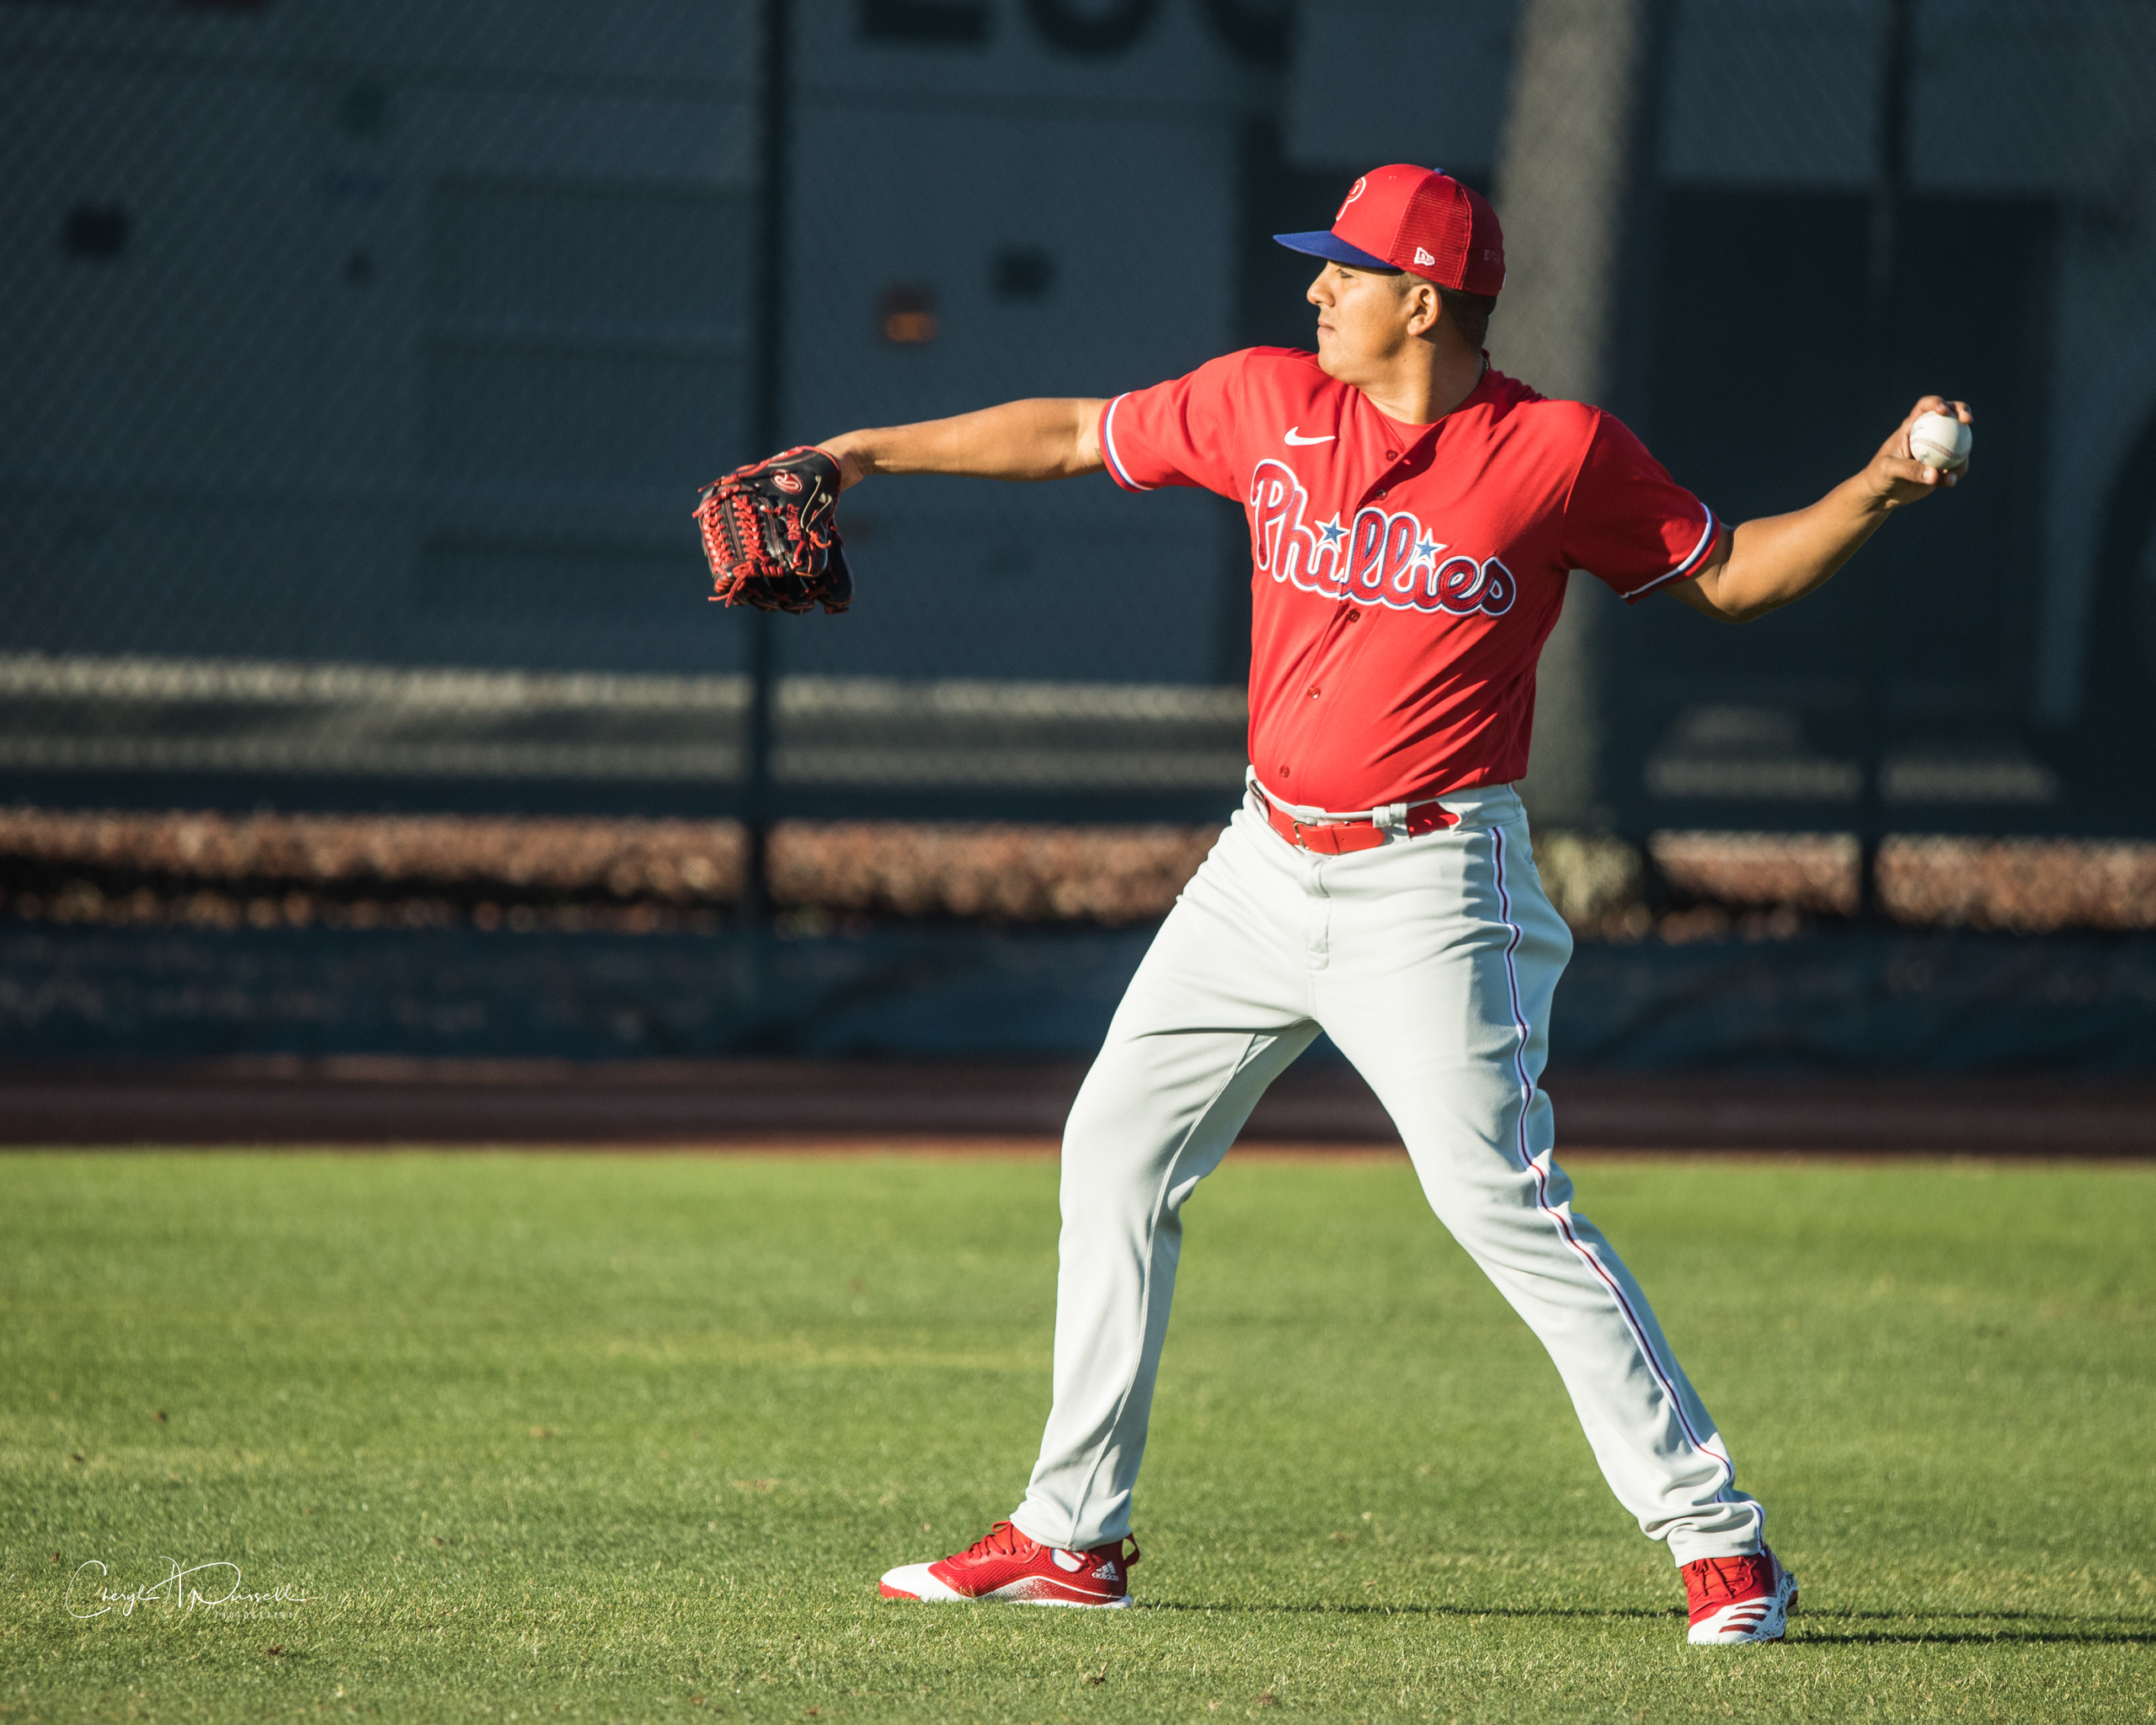 Before his walk-off, Rhys Hoskins and his wife Jayme 'went yard' for MDA   Phillies Nation - Your source for Philadelphia Phillies news, opinion,  history, rumors, events, and other fun stuff.